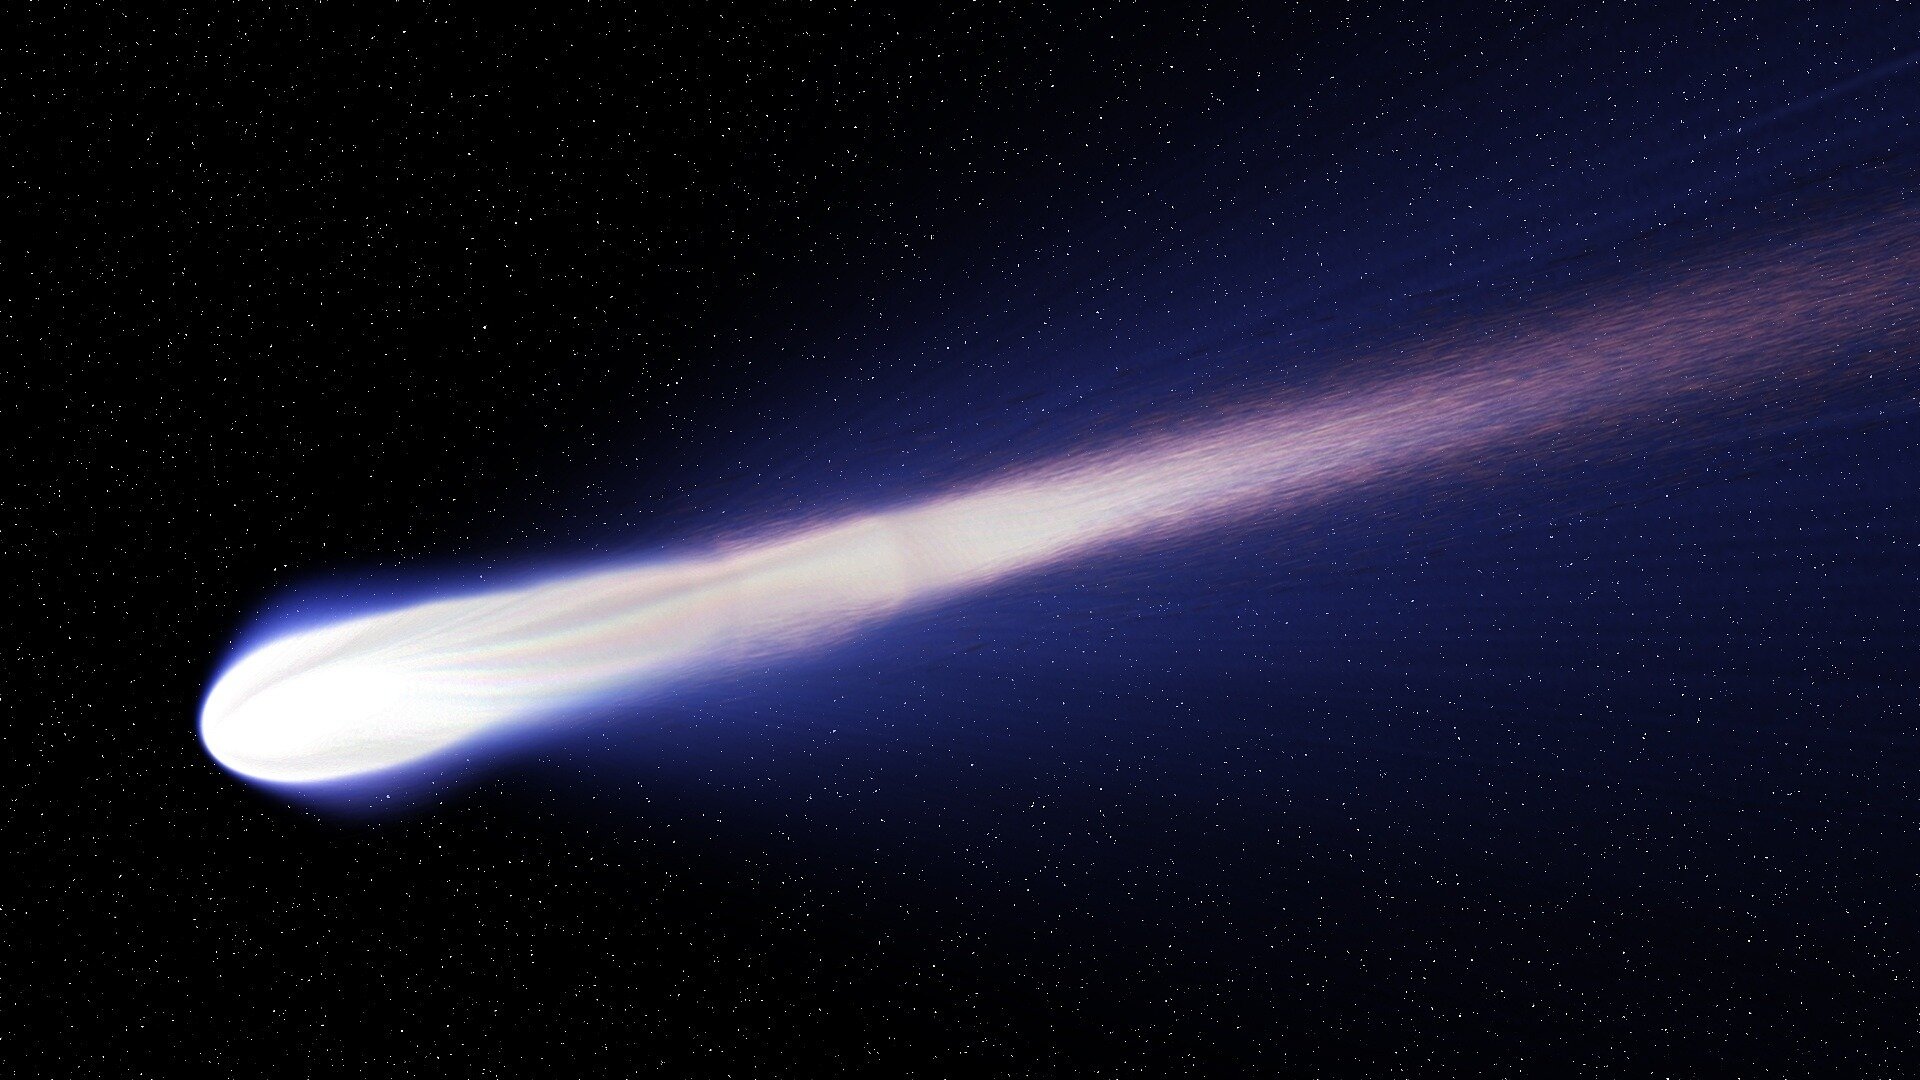 K2, the brightest comet in our solar system, will swing by Earth